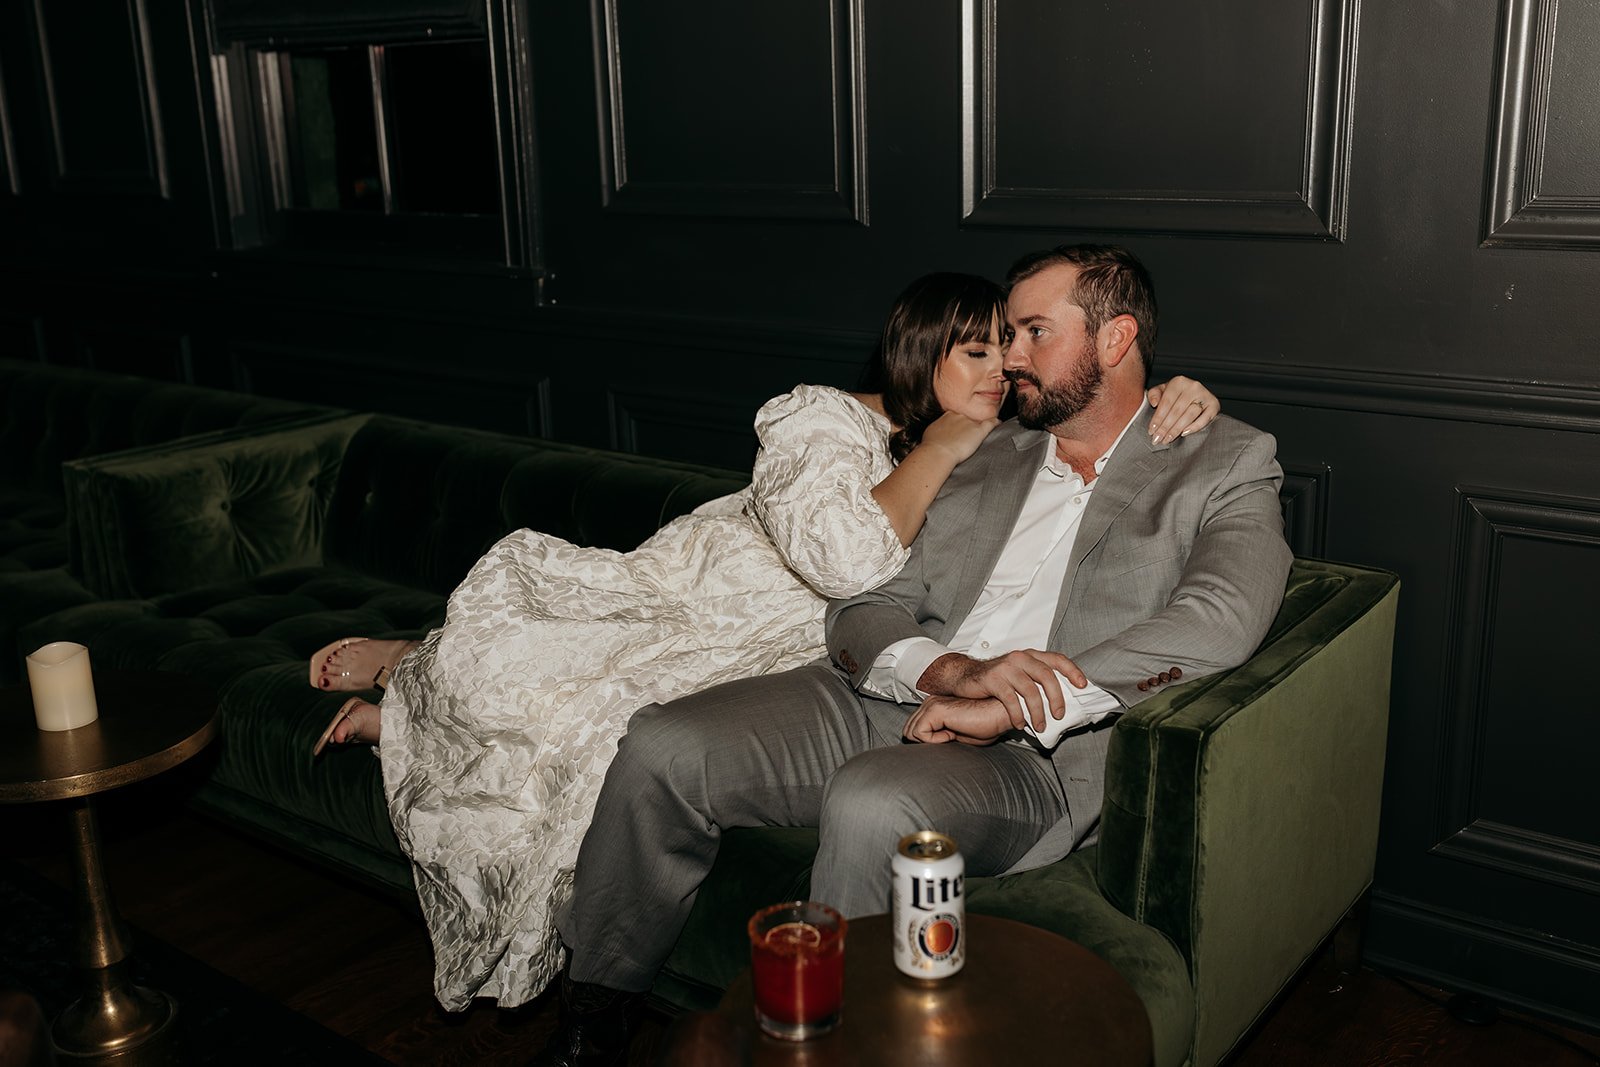 They were so many unique photo opportunities for their Sage Restaurant engagement photos